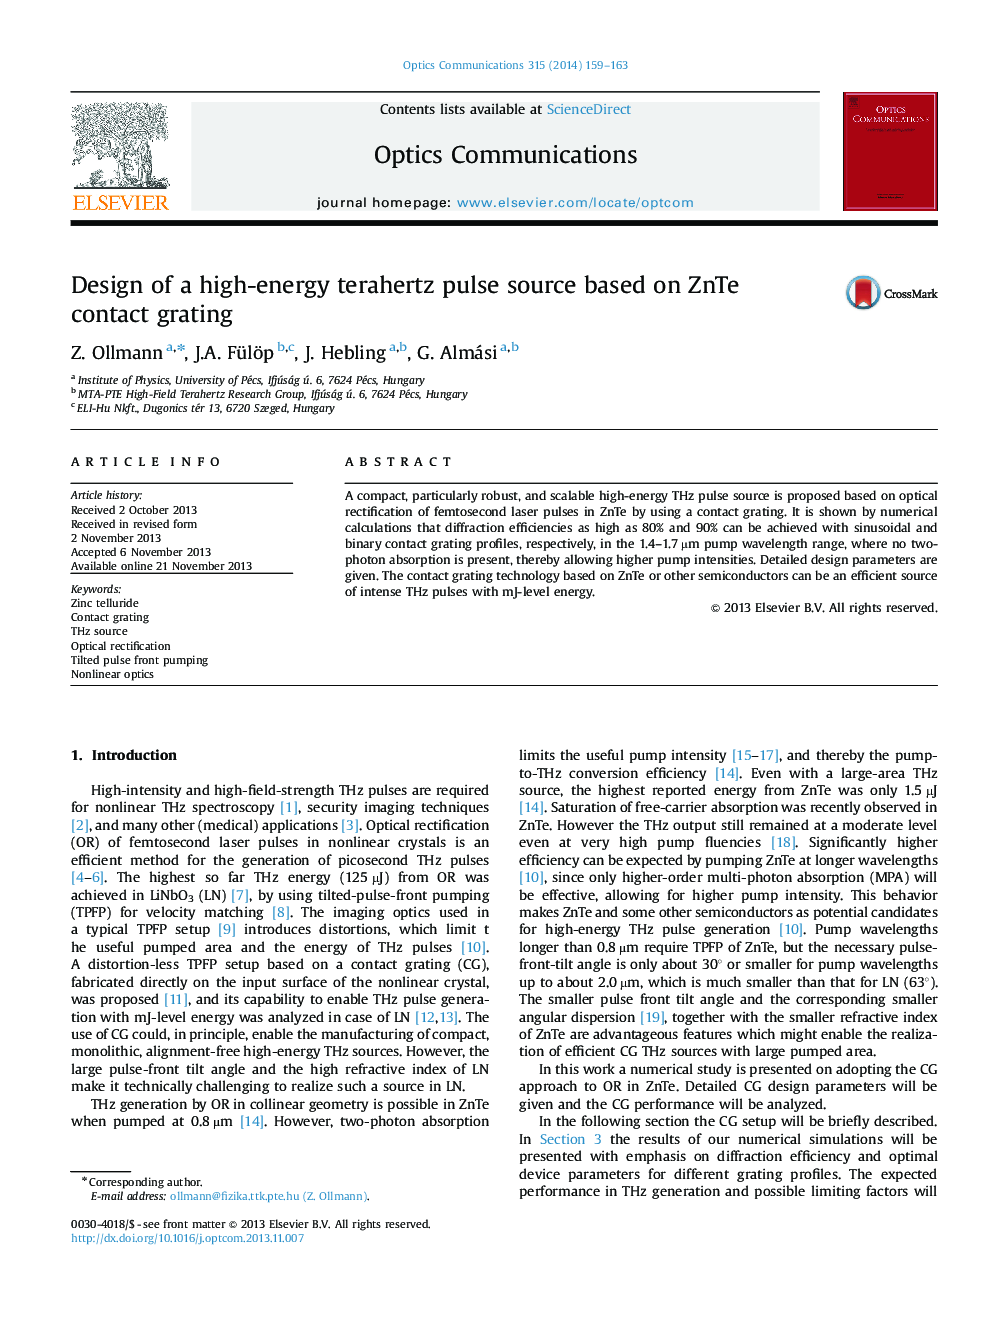 Design of a high-energy terahertz pulse source based on ZnTe contact grating